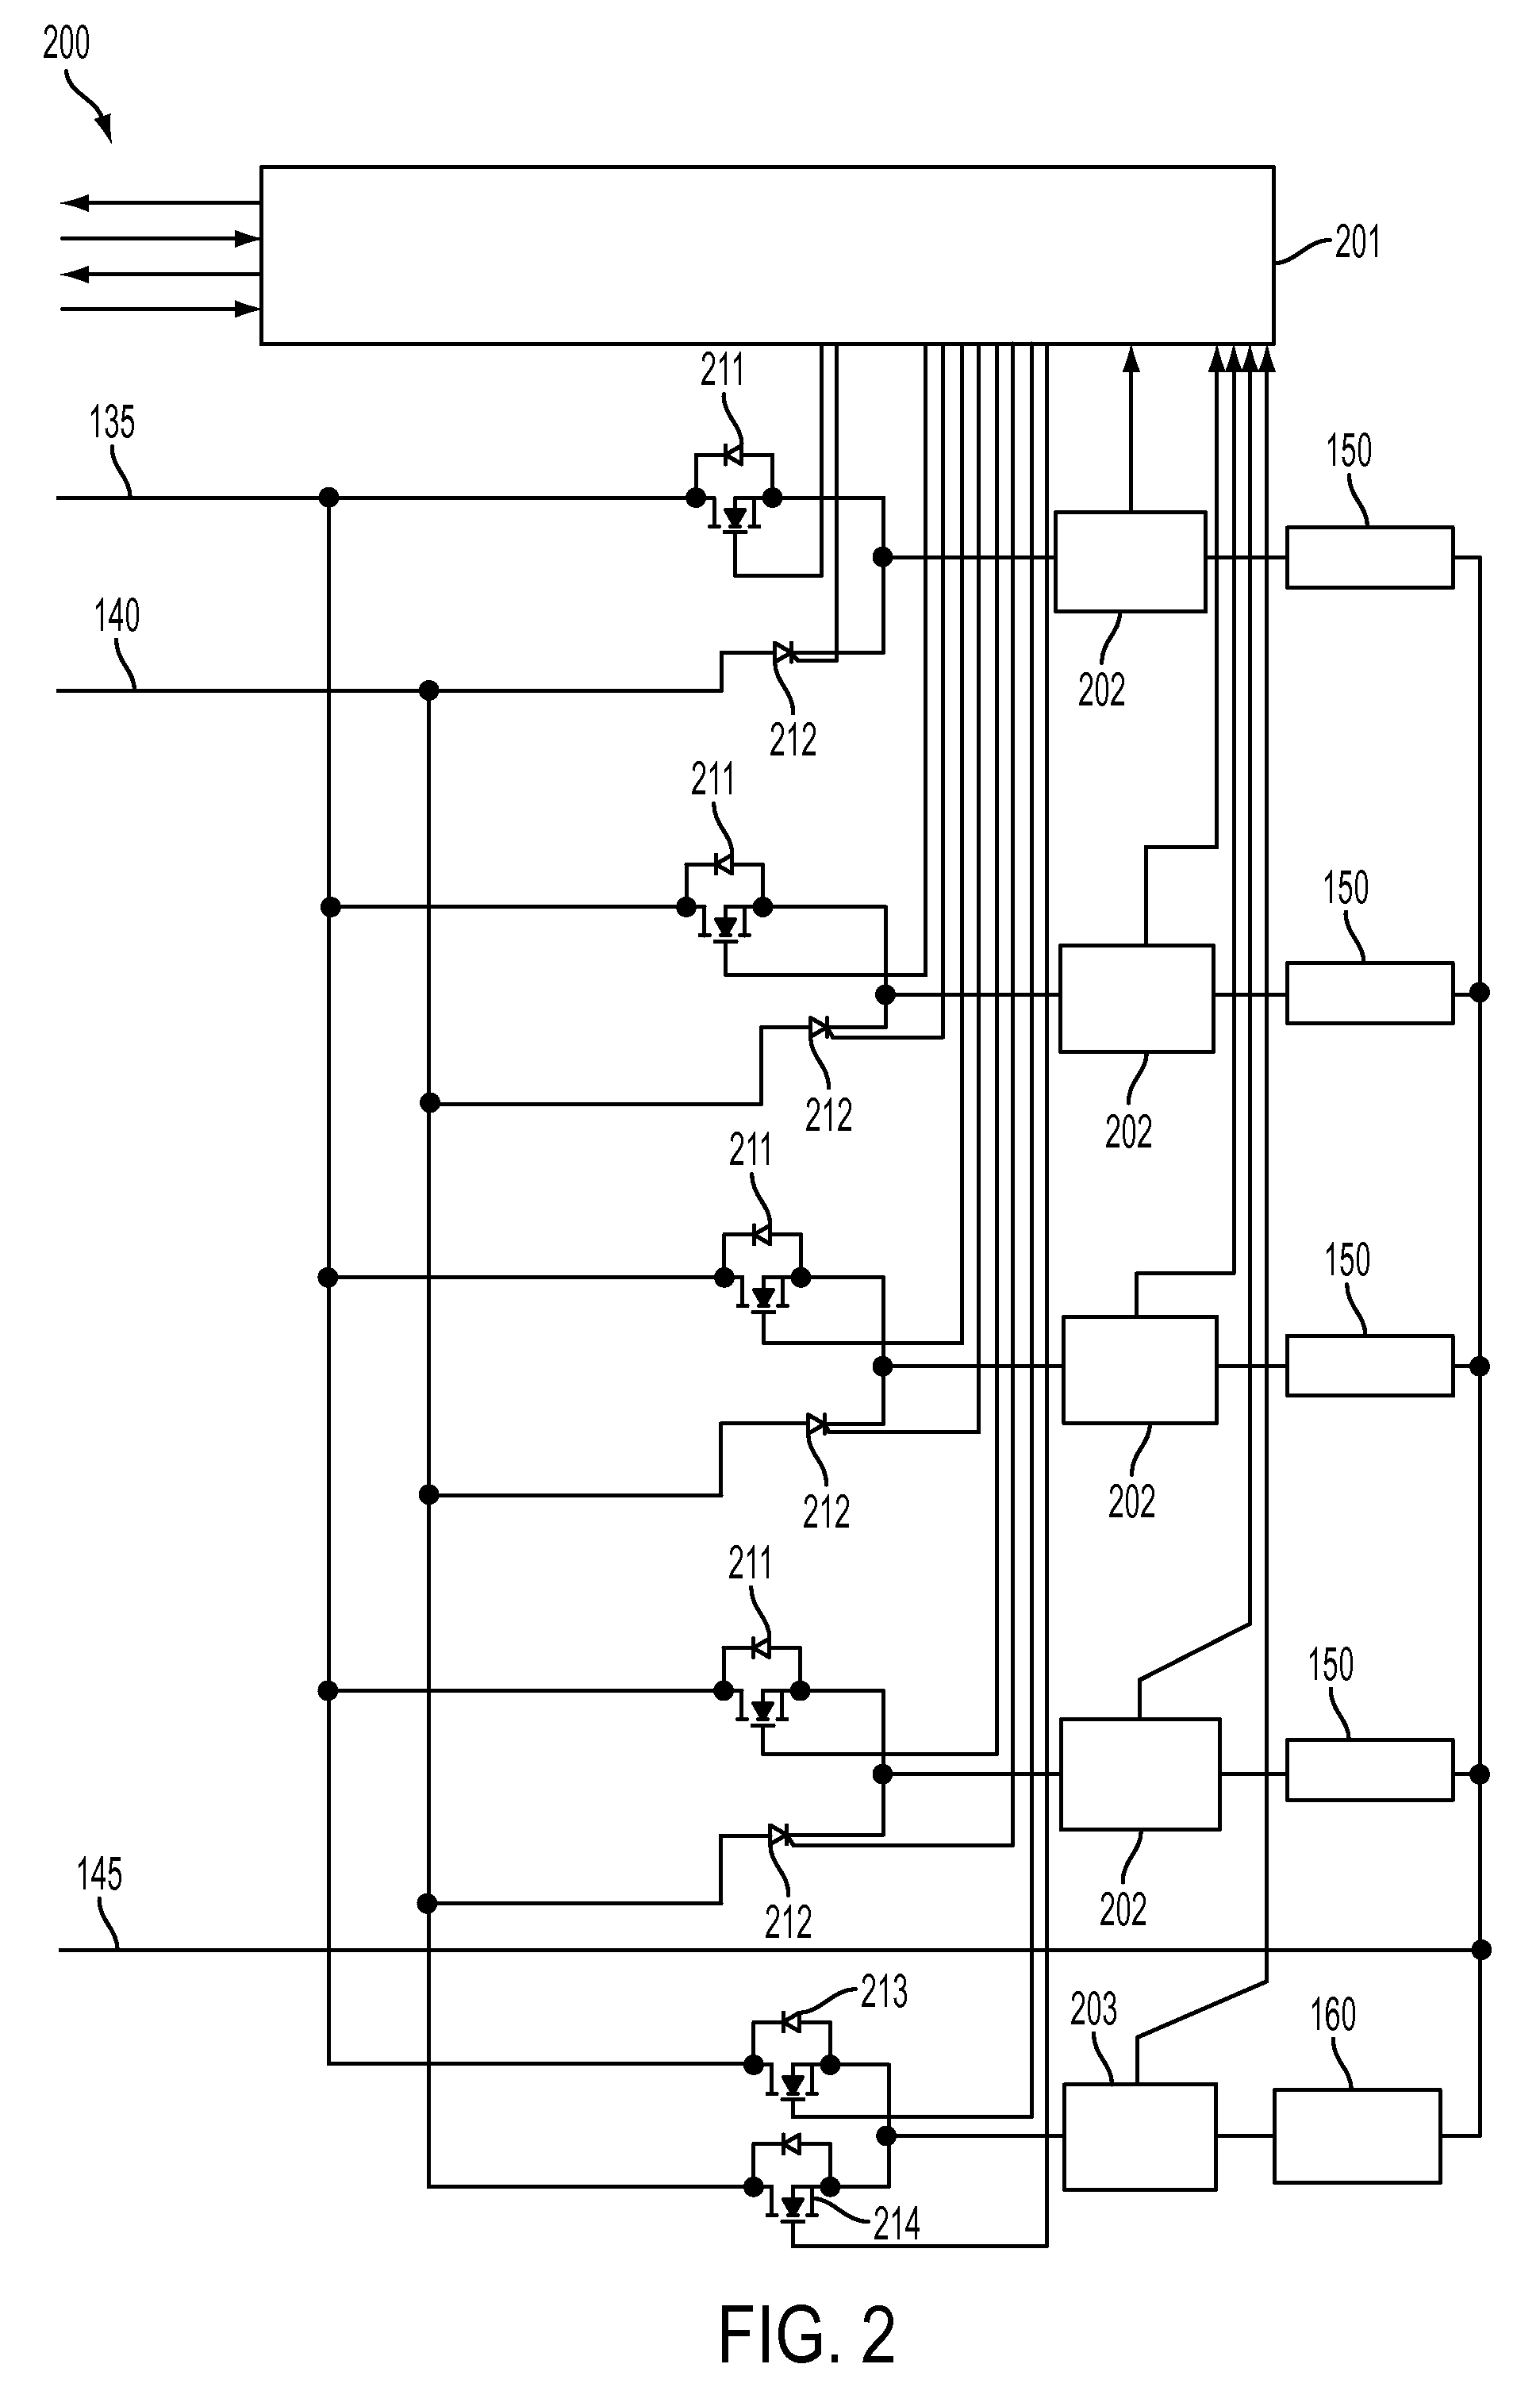 Direct current generating, management and distribution system